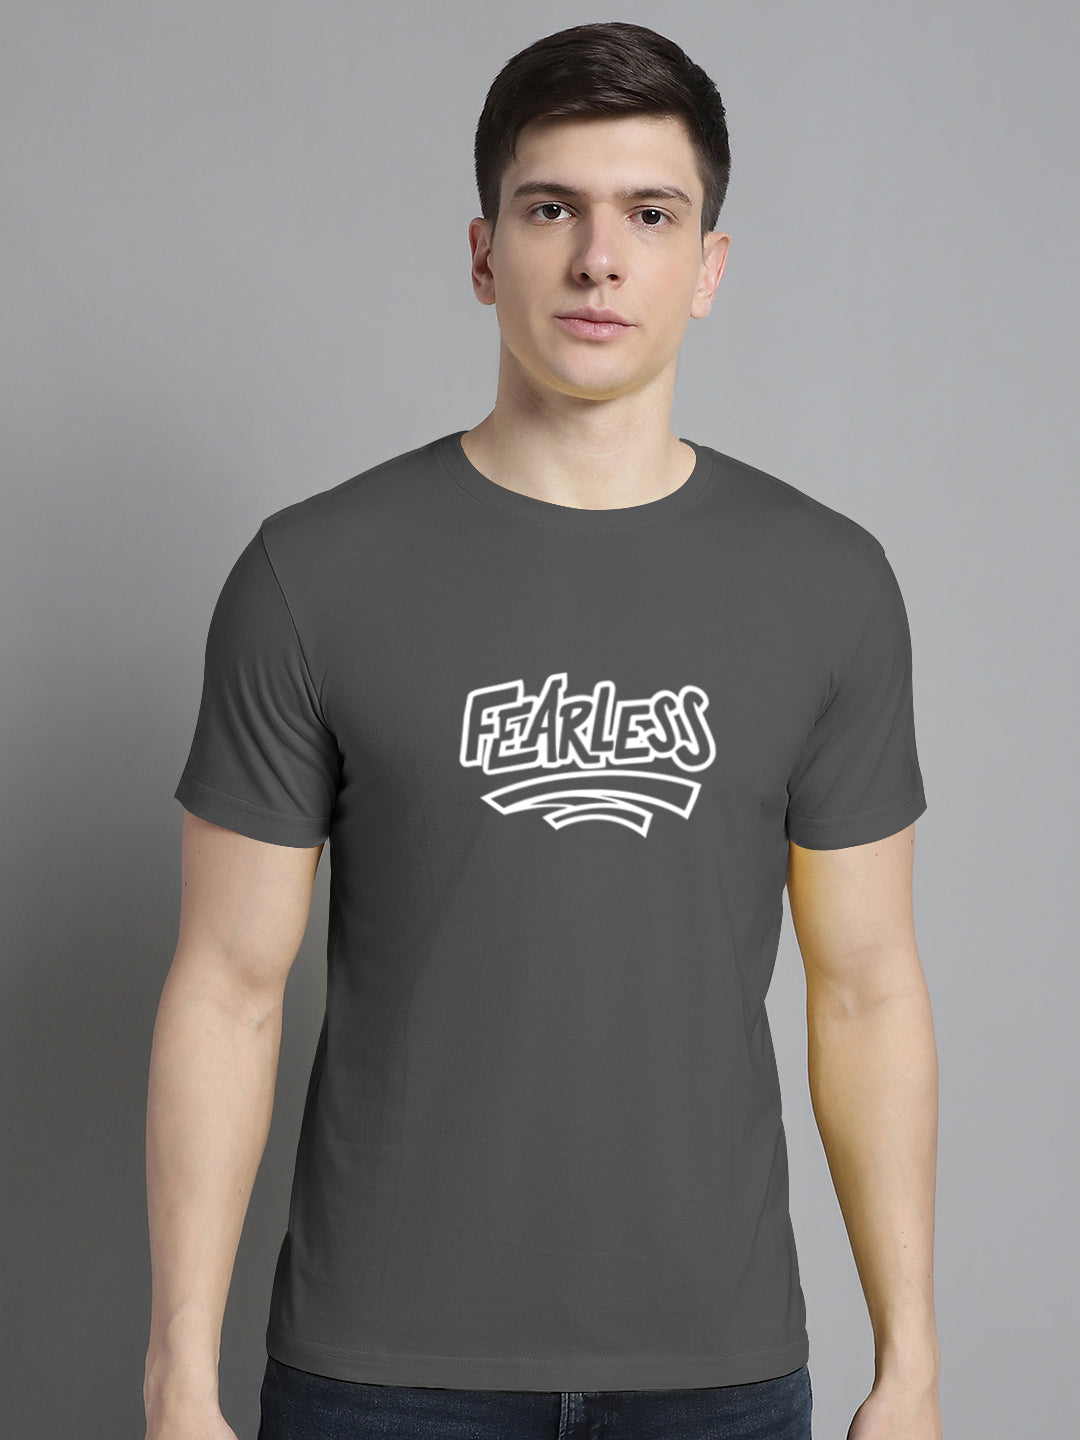 Fbar Fearless Cotton Round Neck T-Shirt - Friskers